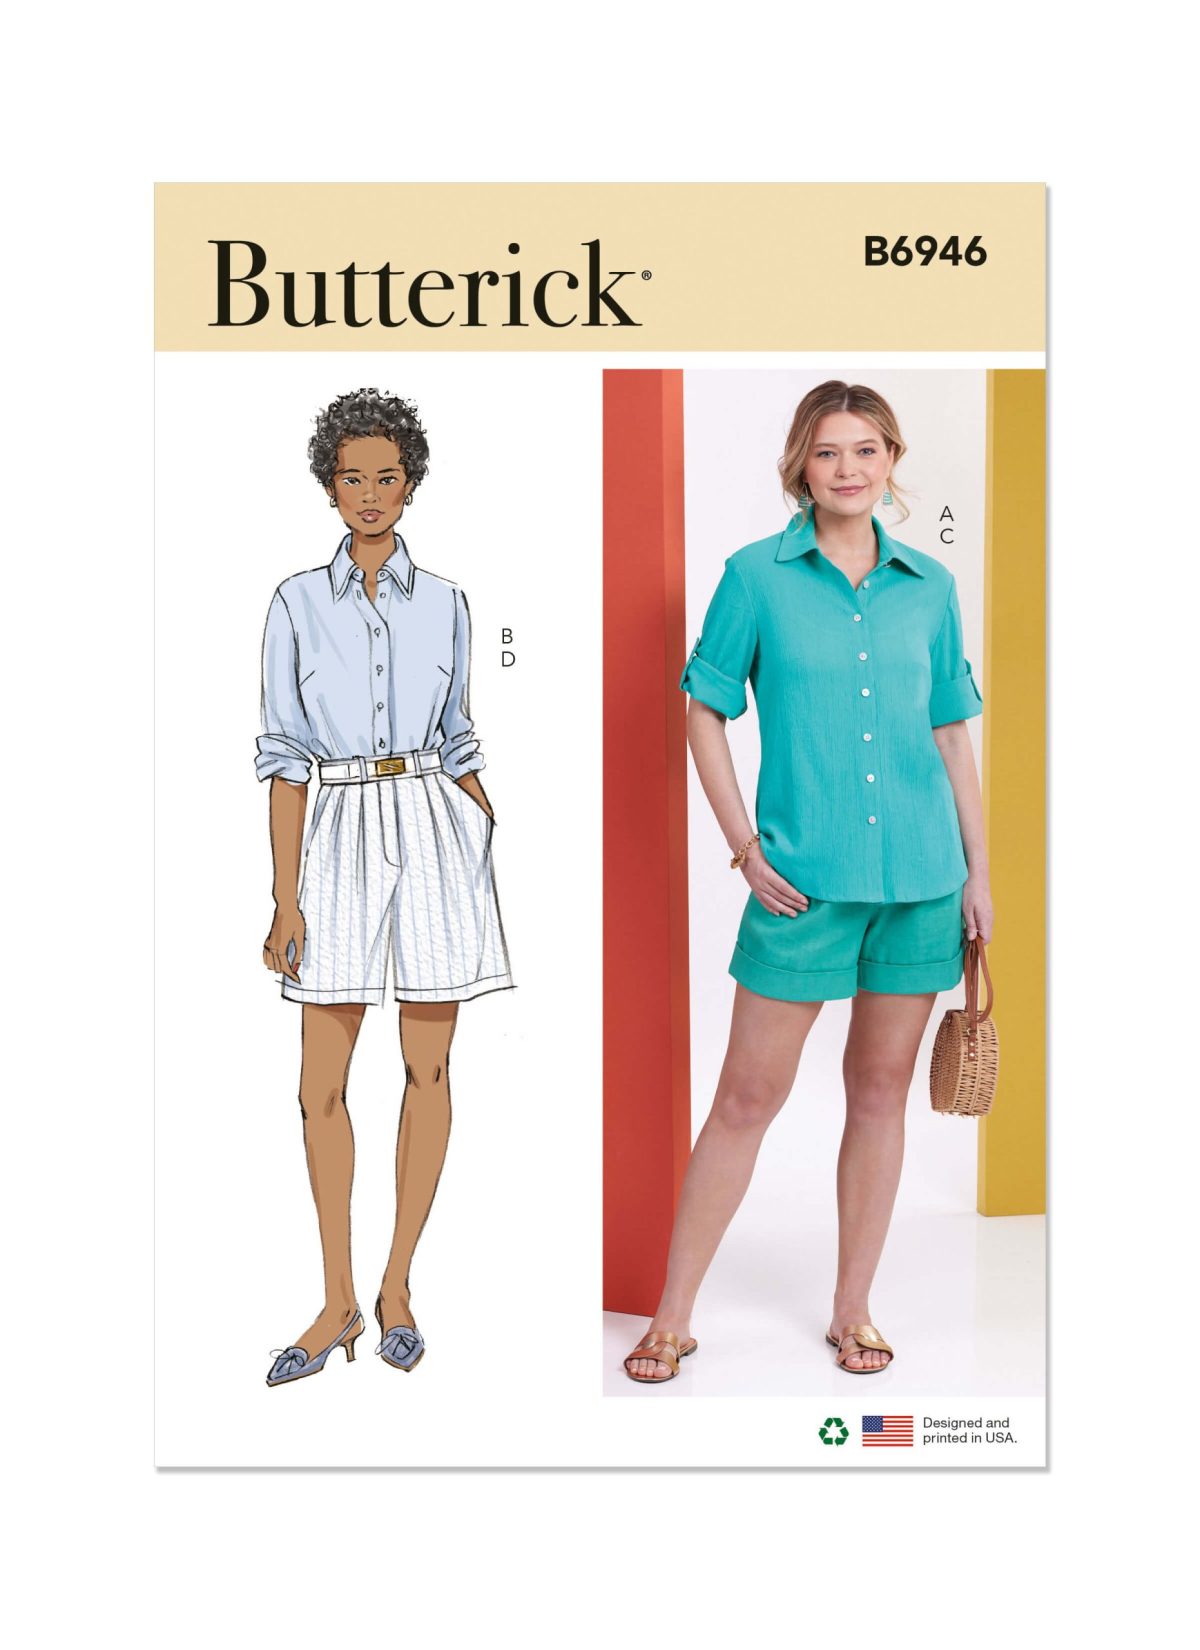 Butterick Sewing Pattern B6946 Misses' Shirts and Shorts